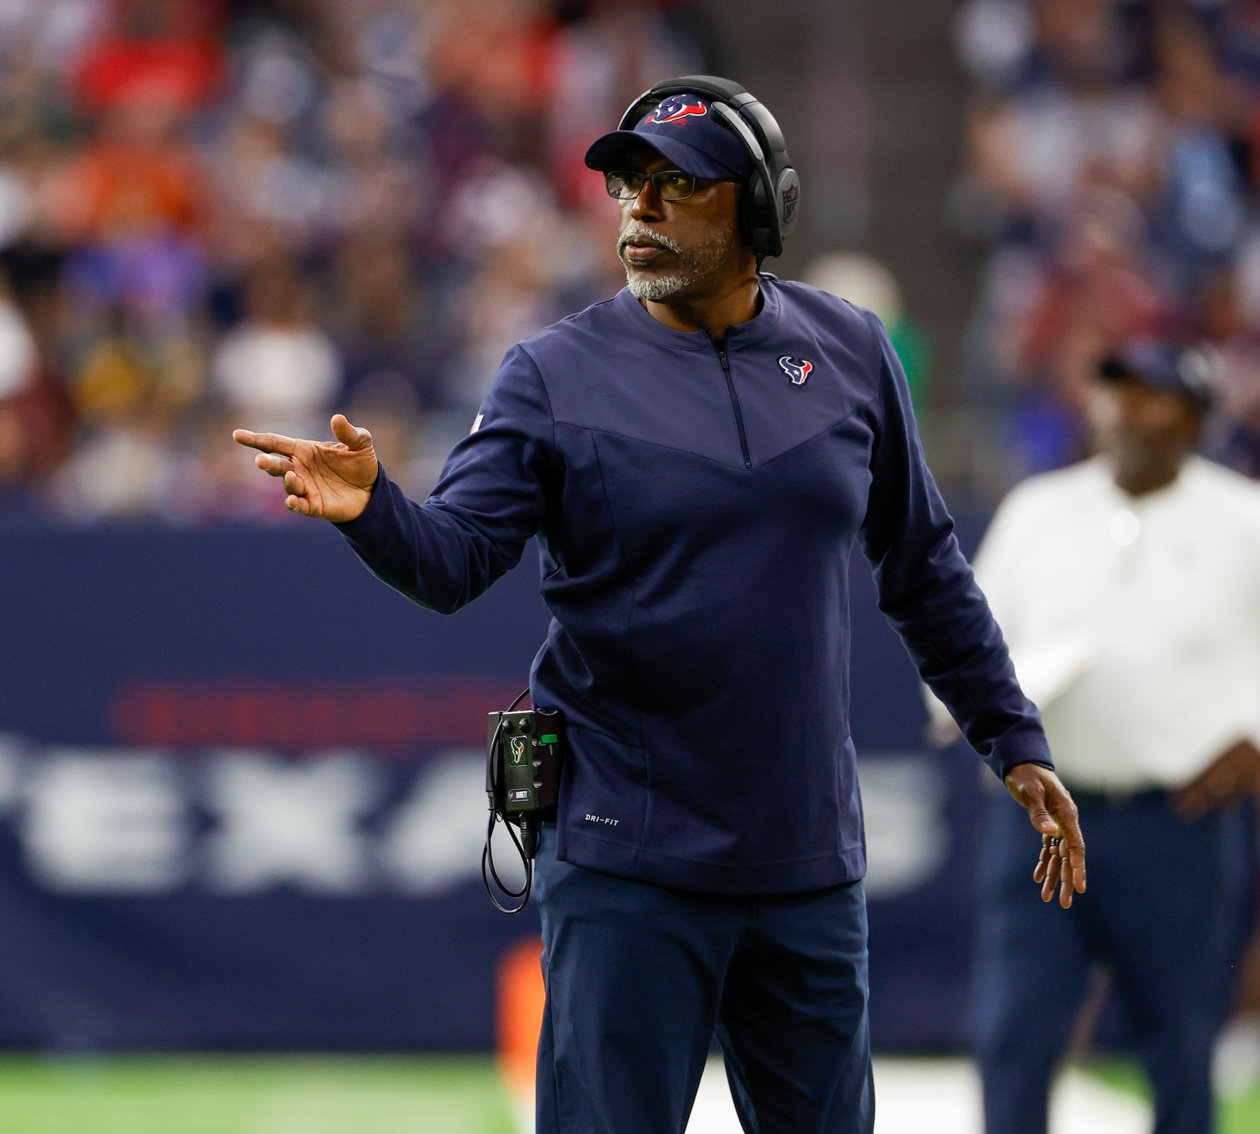 Texans running backs coach Danny Barrett during an NFL game between the Texans and the Titans on Oct. 30, 2022 in Houston.